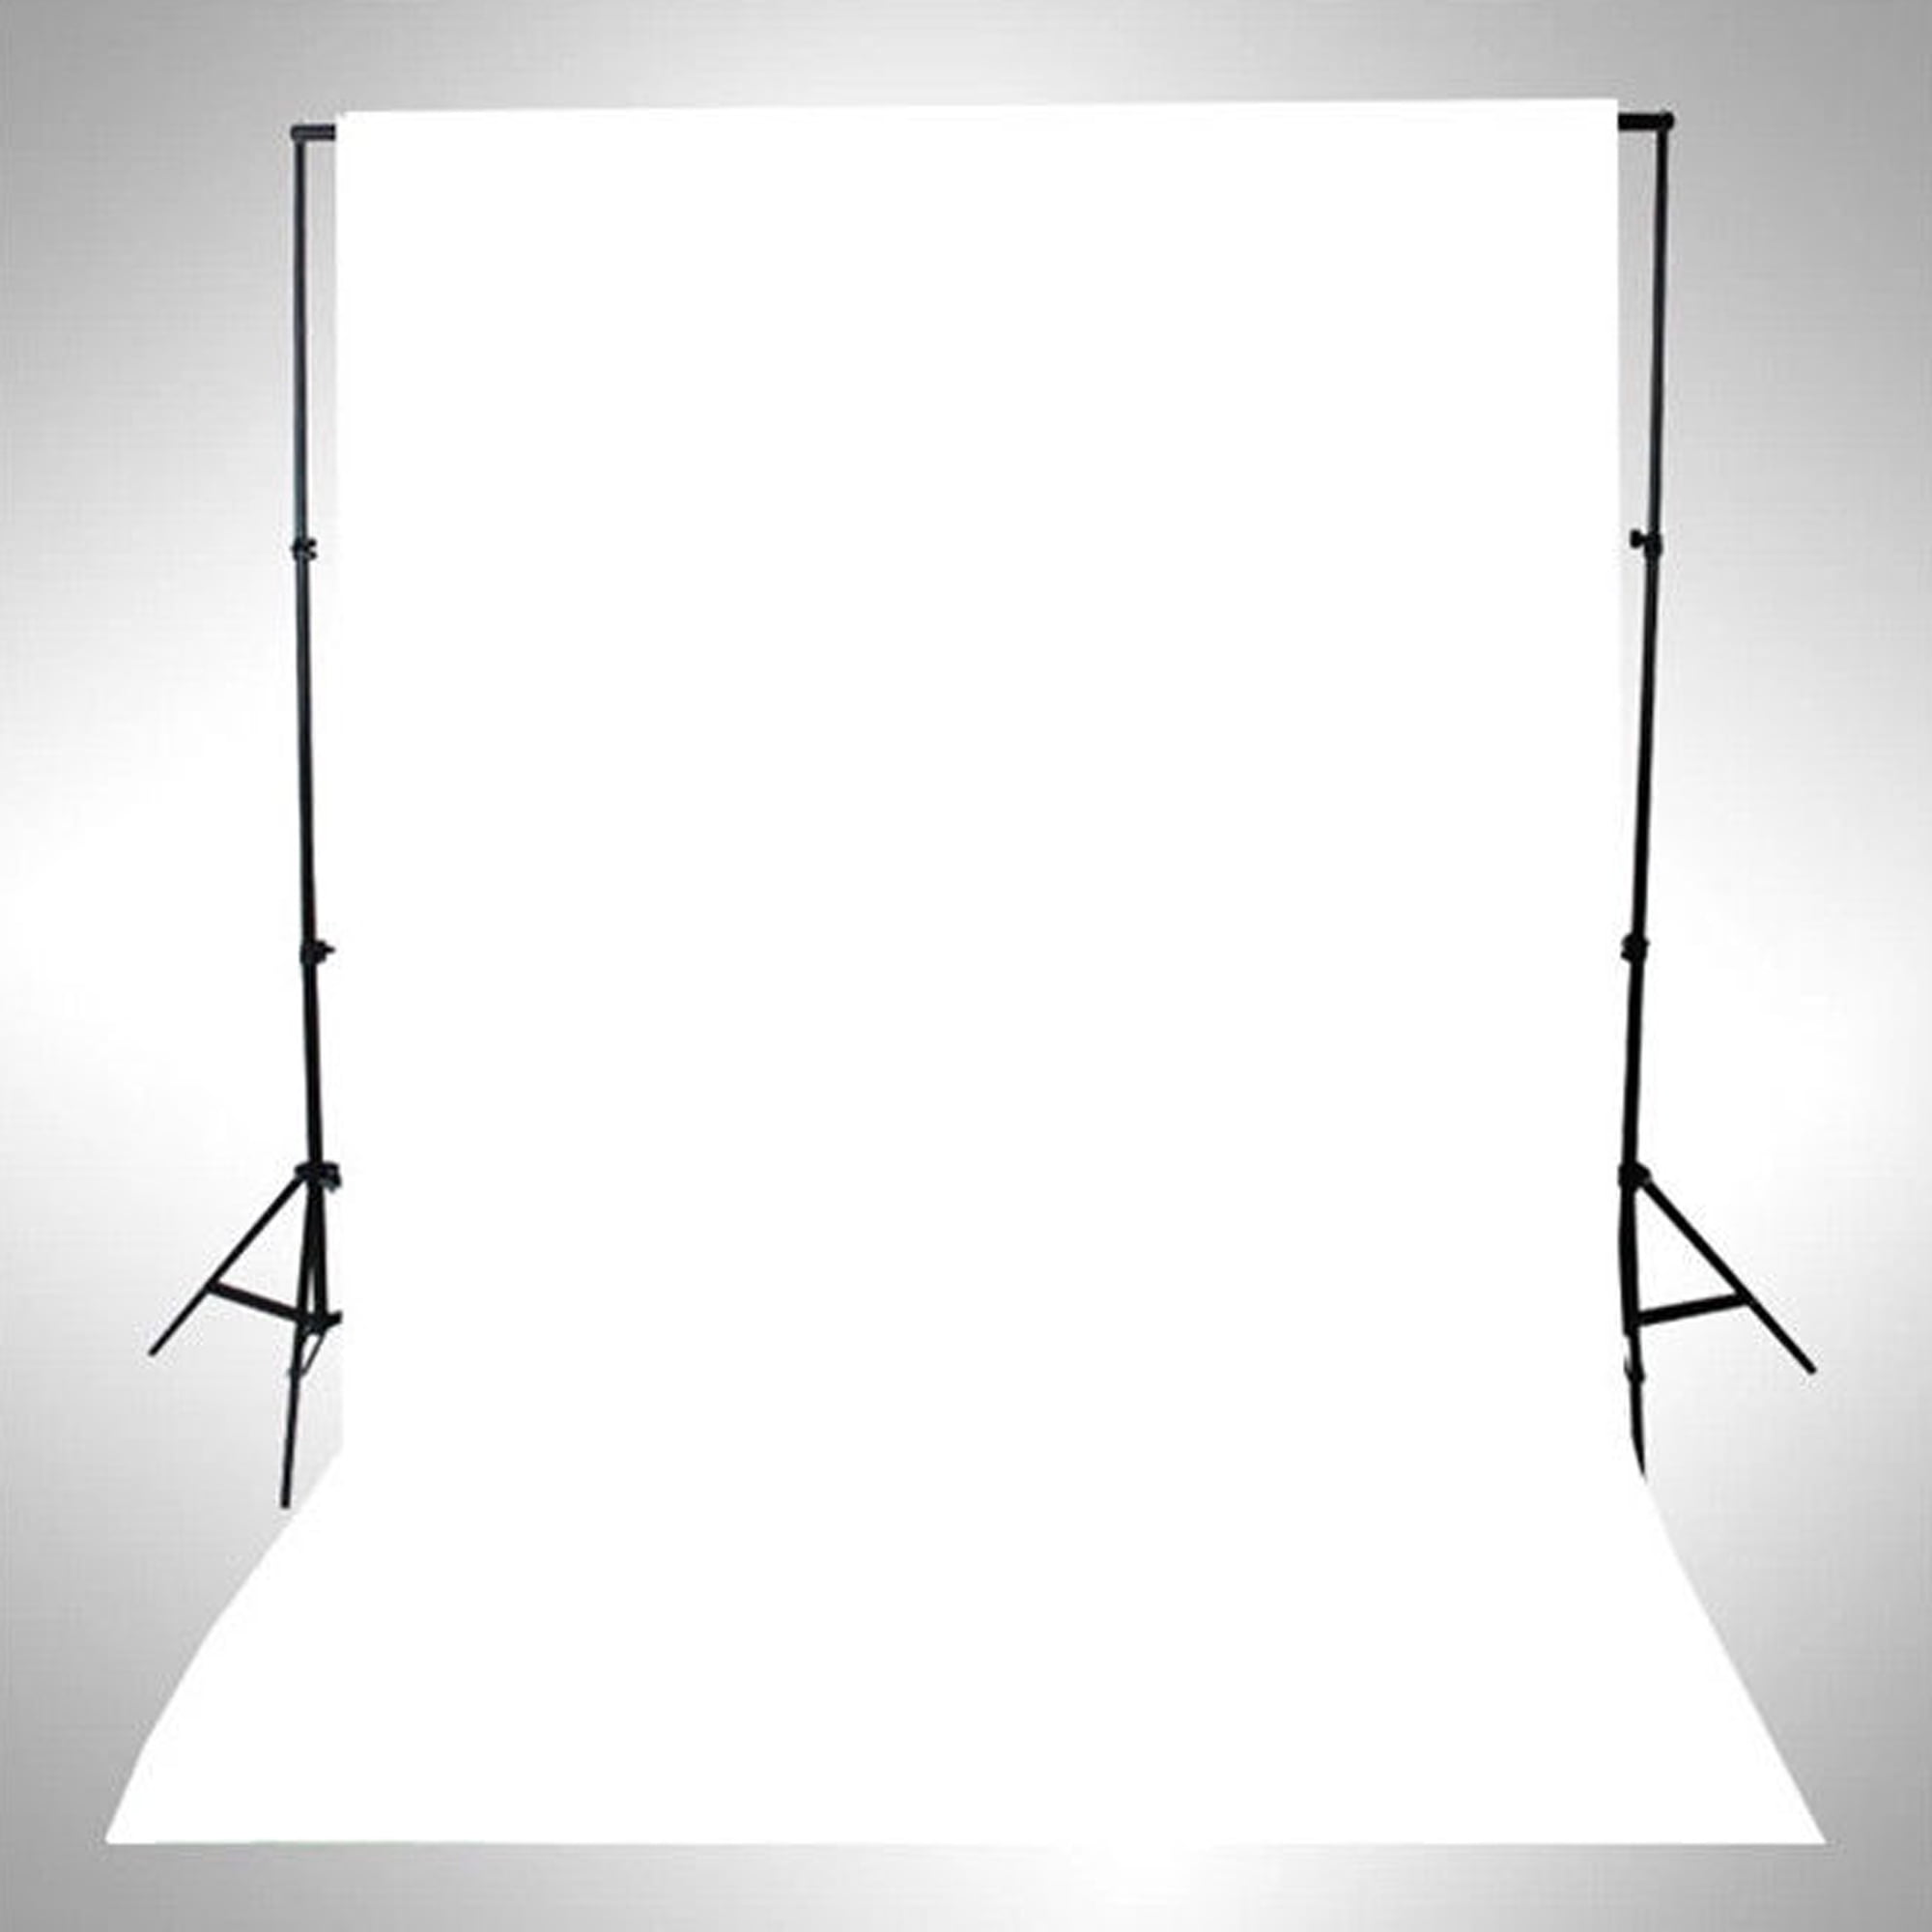 LELINTA Studio Photo Video Photography Backdrops 3x5ft Bright White Solid  Color Vinyl Fabric Background Screen Props 